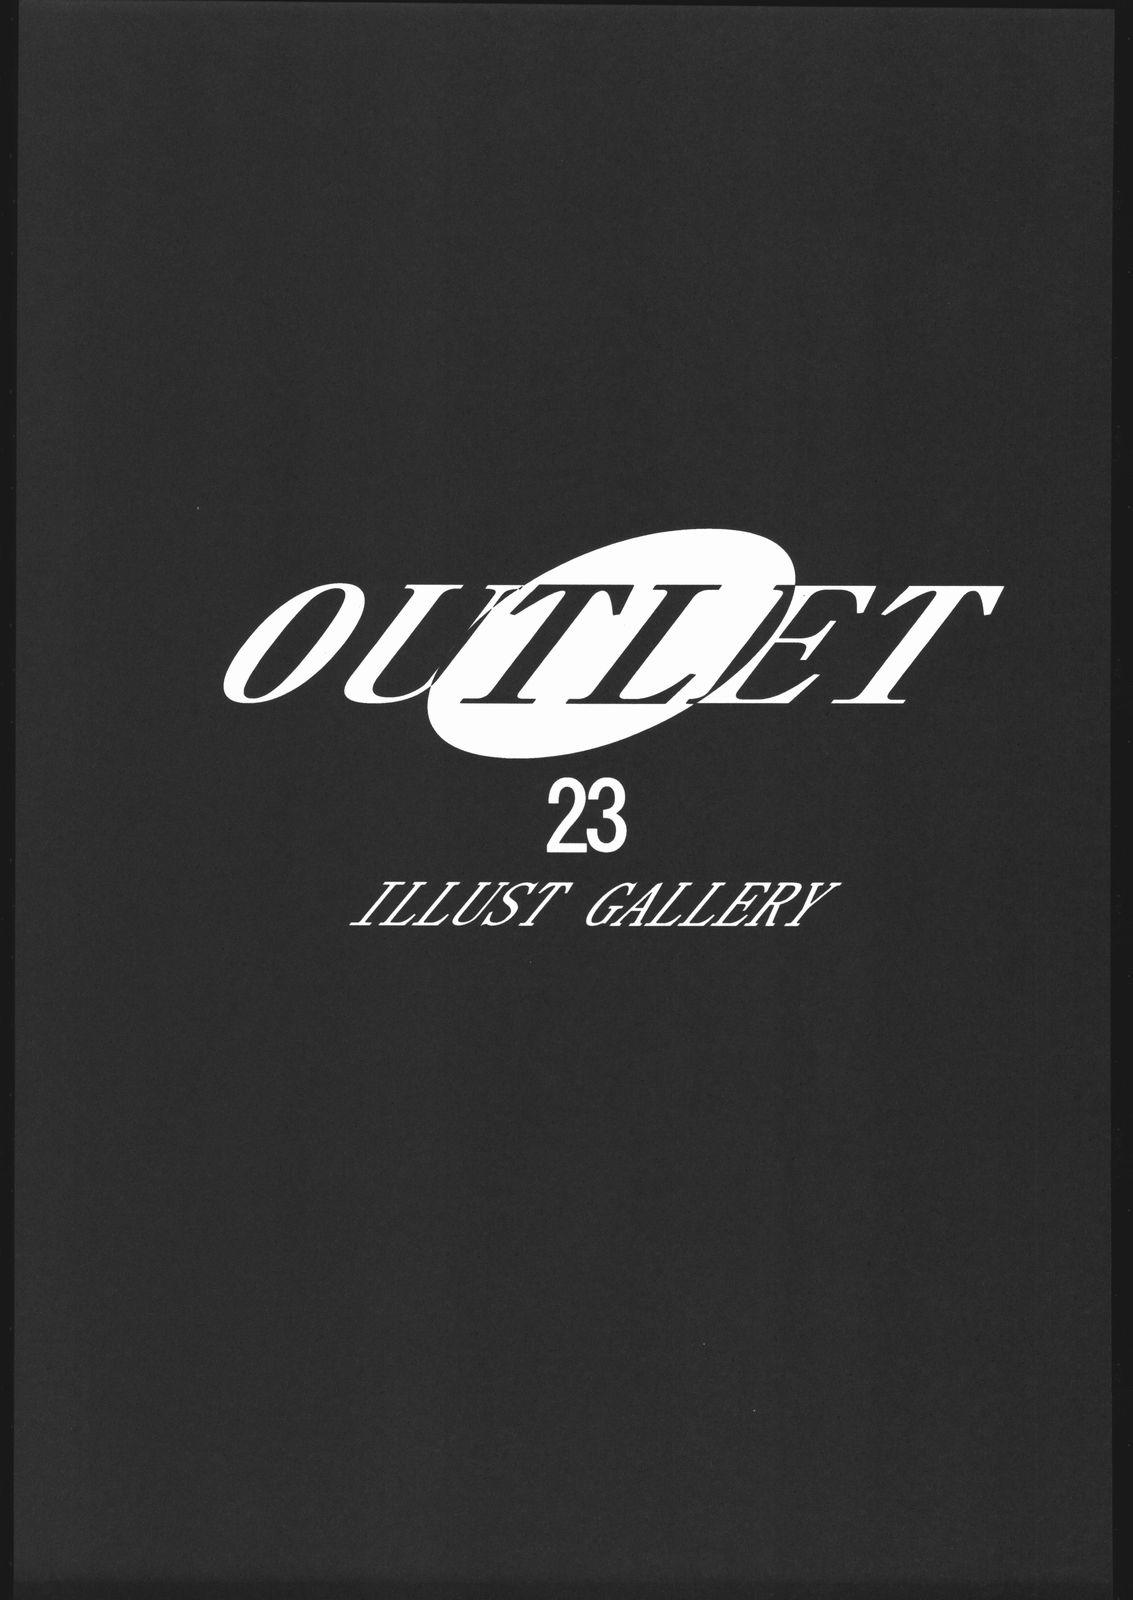 OUTLET 23 39